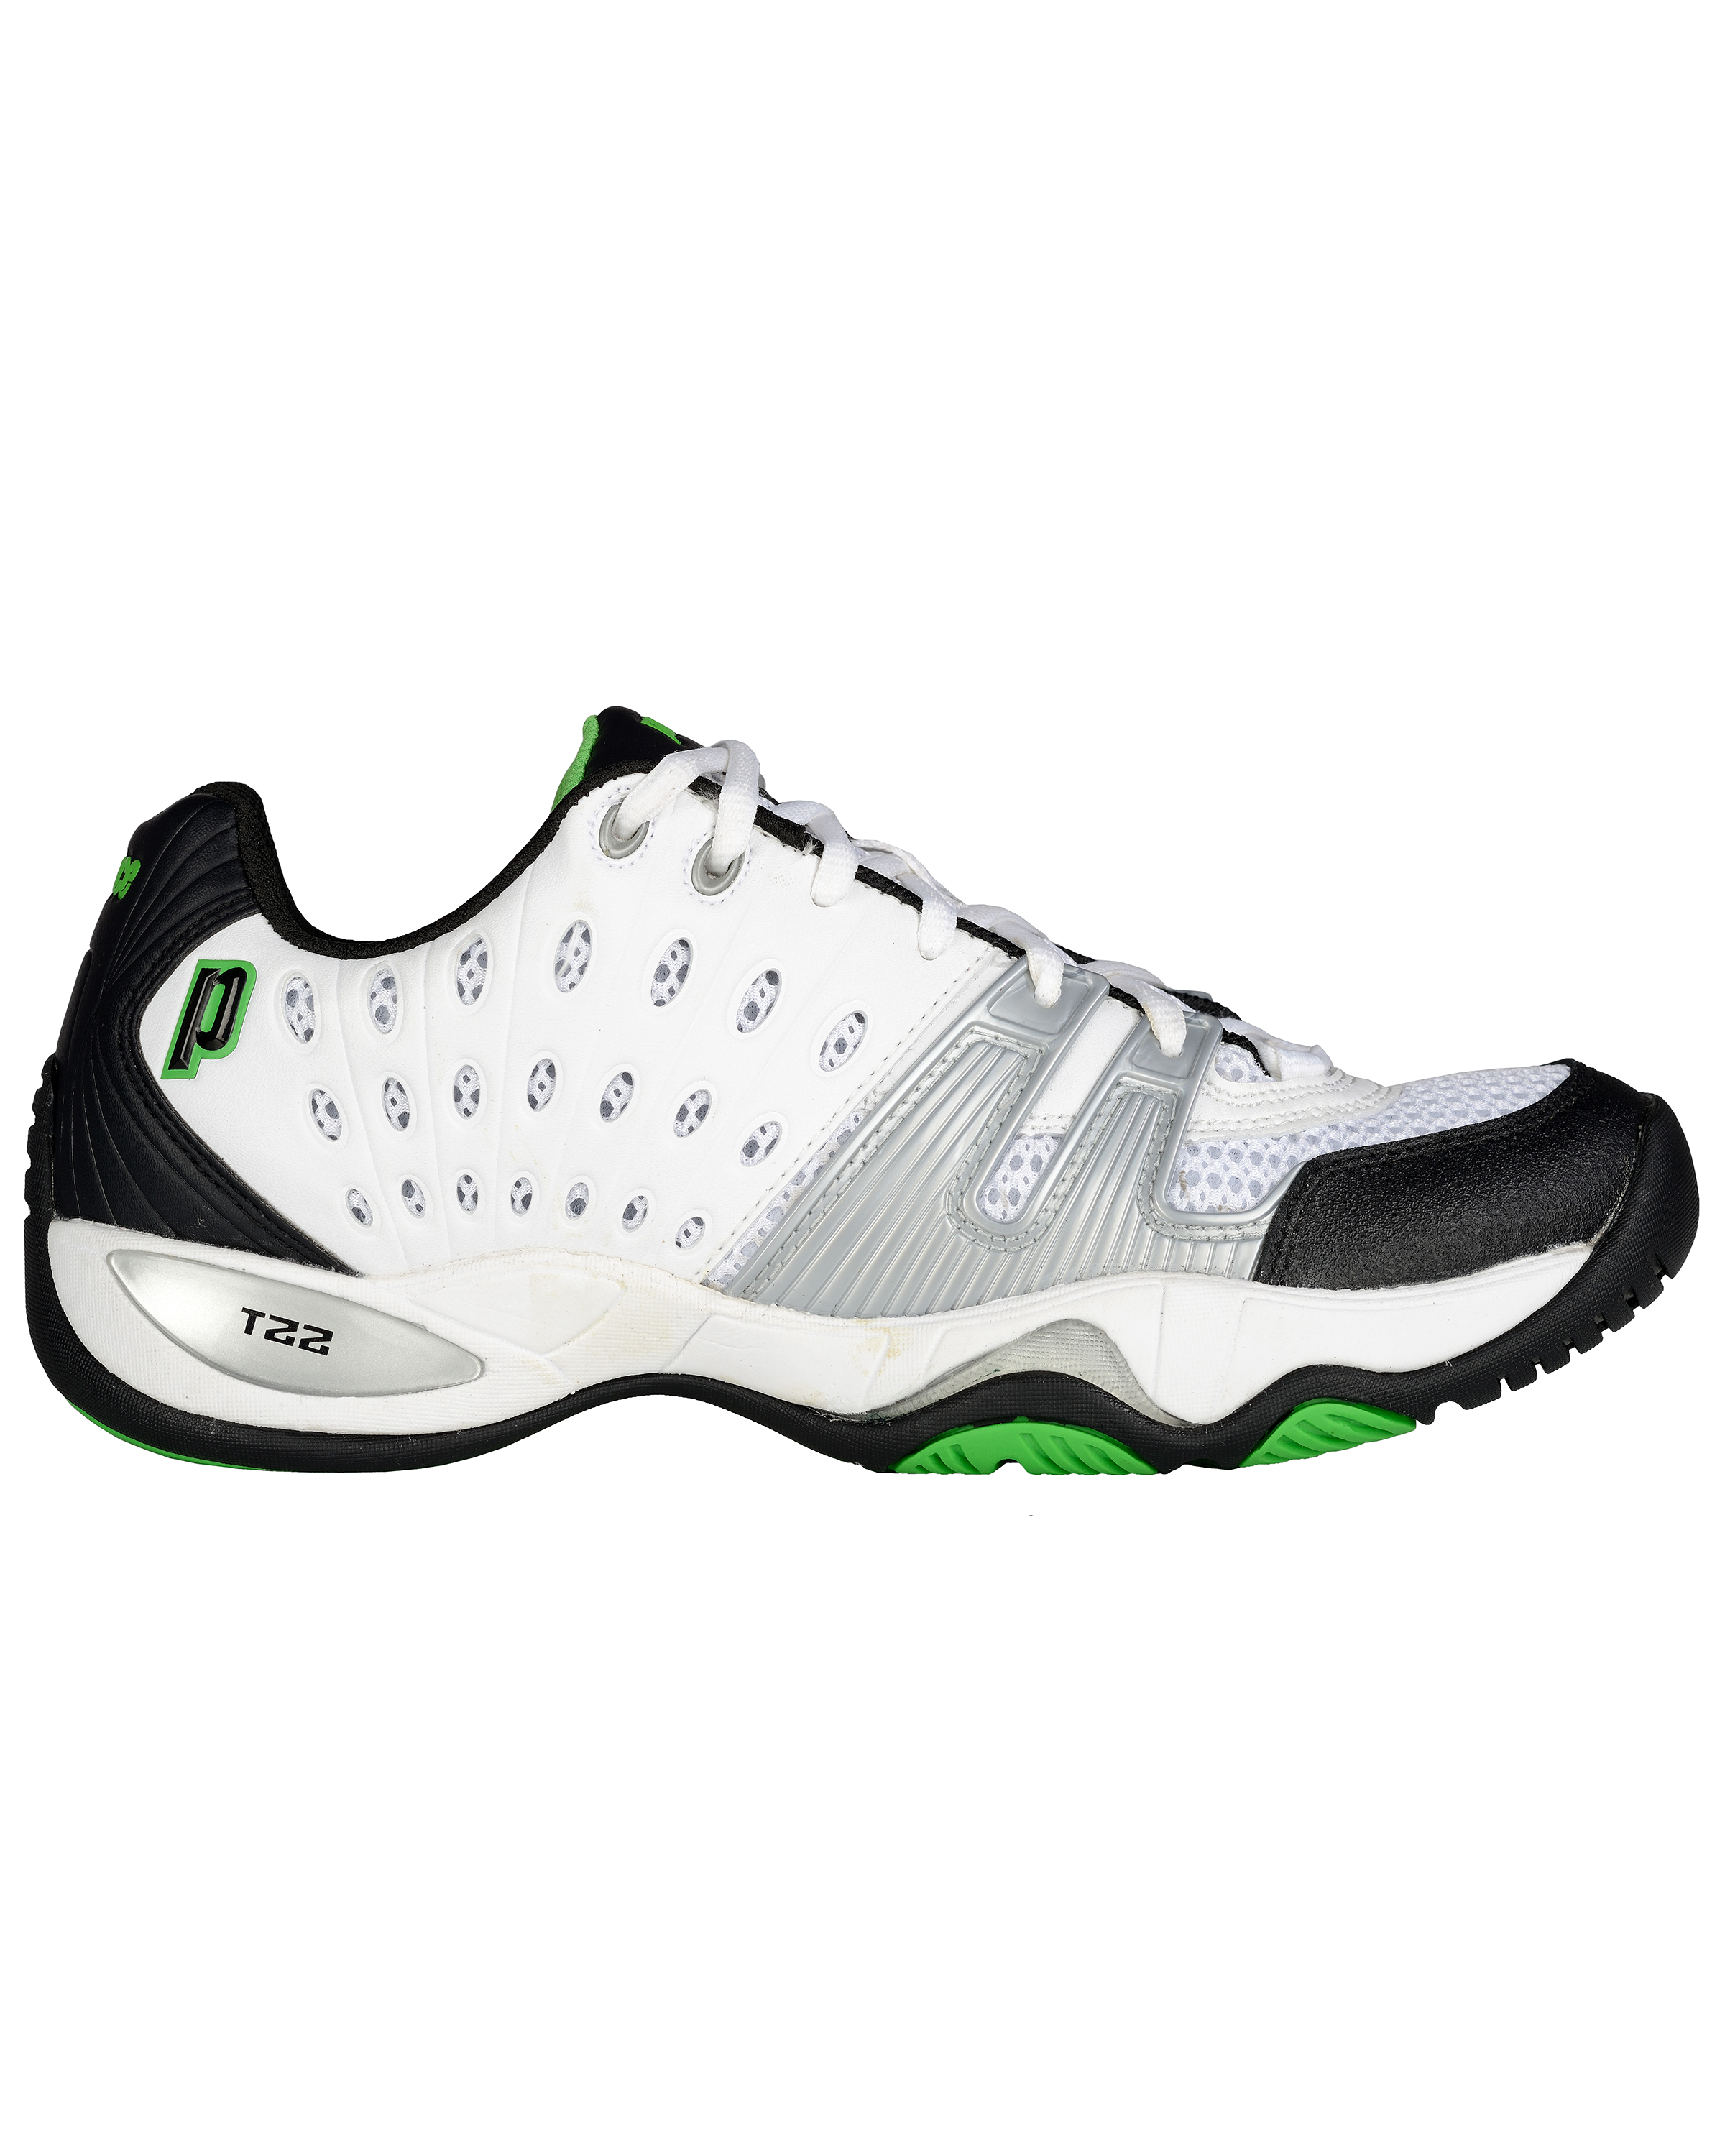 Mens T22 (White_Black_Green) - Lateral 8P984-149.png